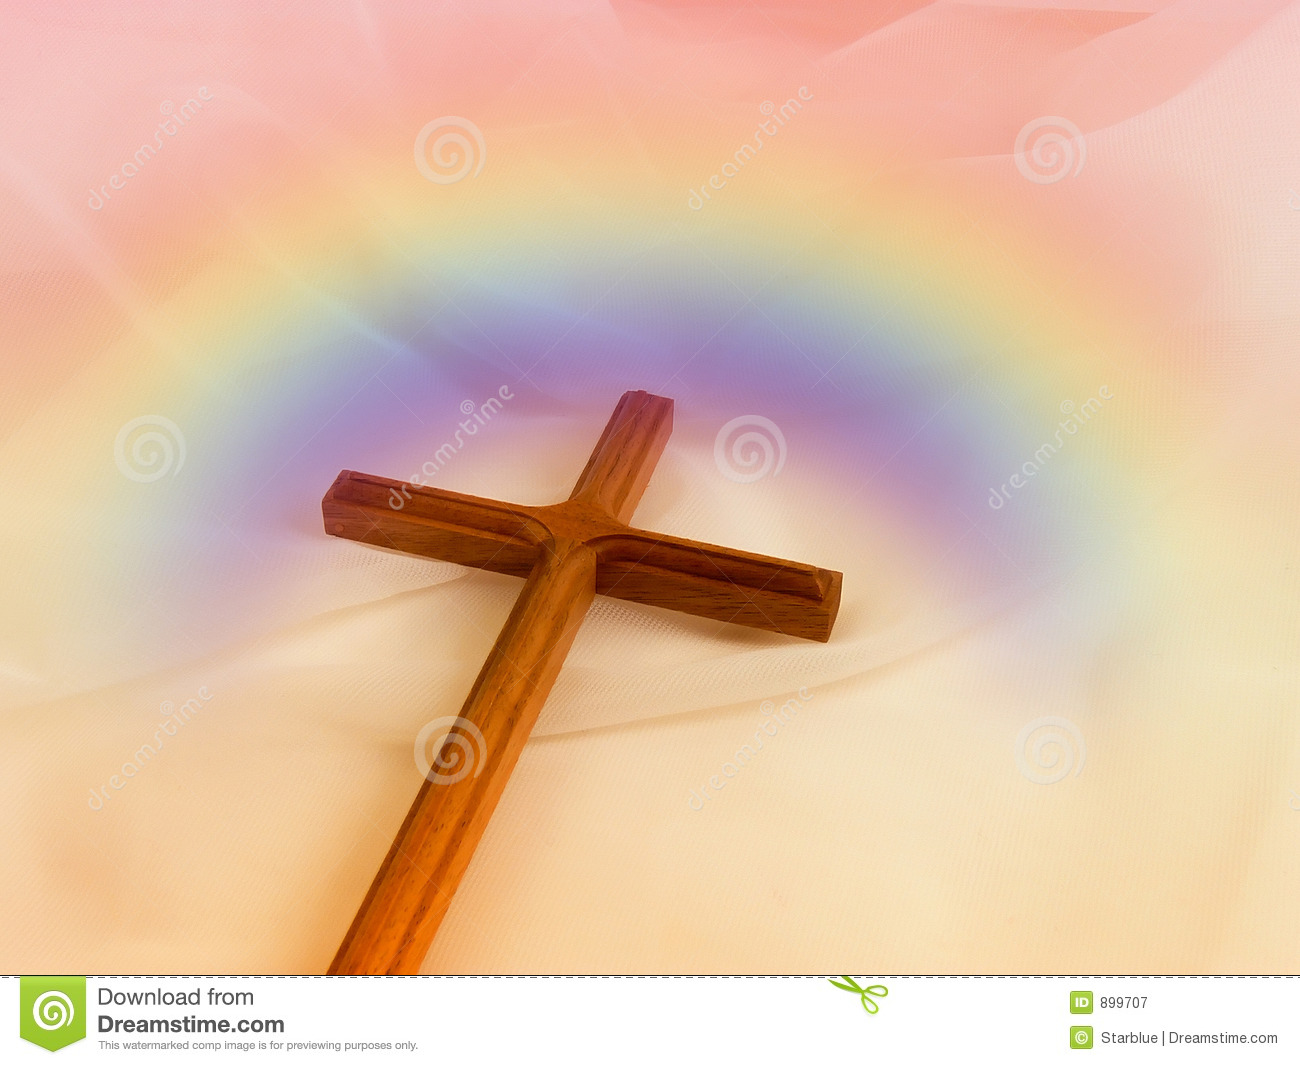 Cross With Rainbow Royalty Free Stock Photography   Image  899707